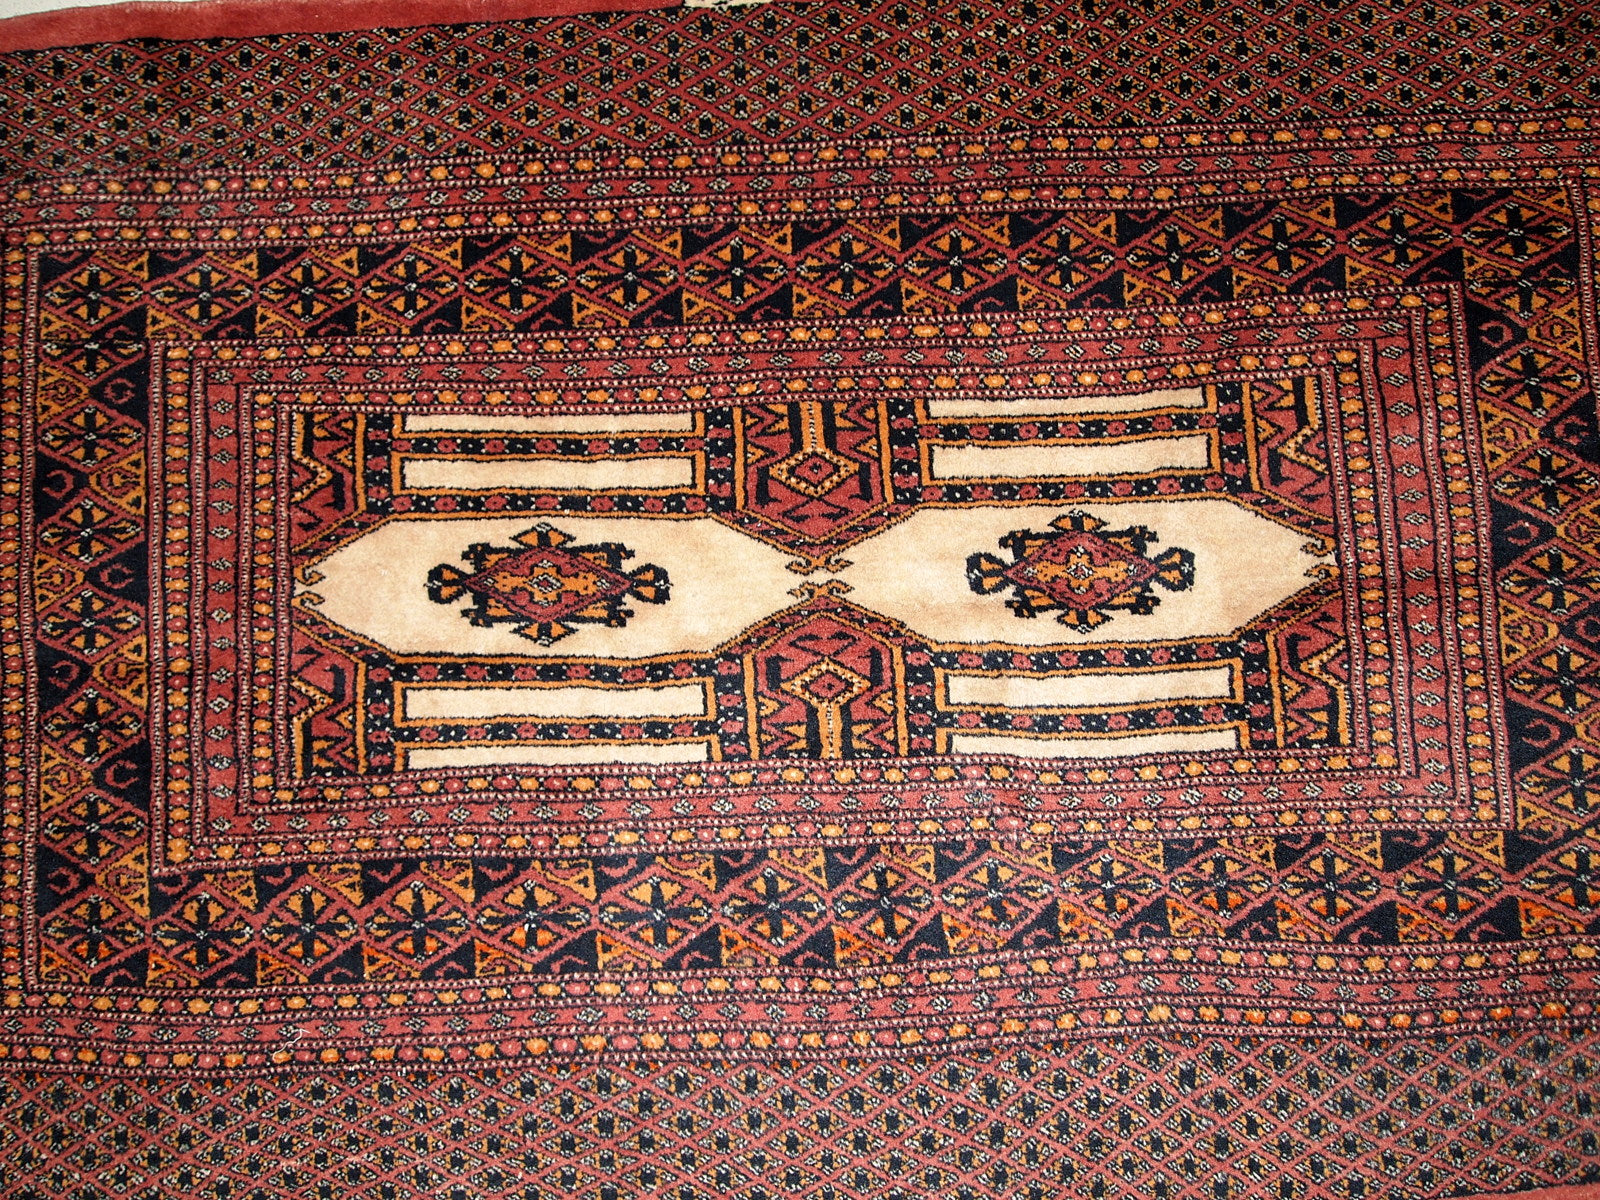 Detailed View of Orange Accents on the Rug